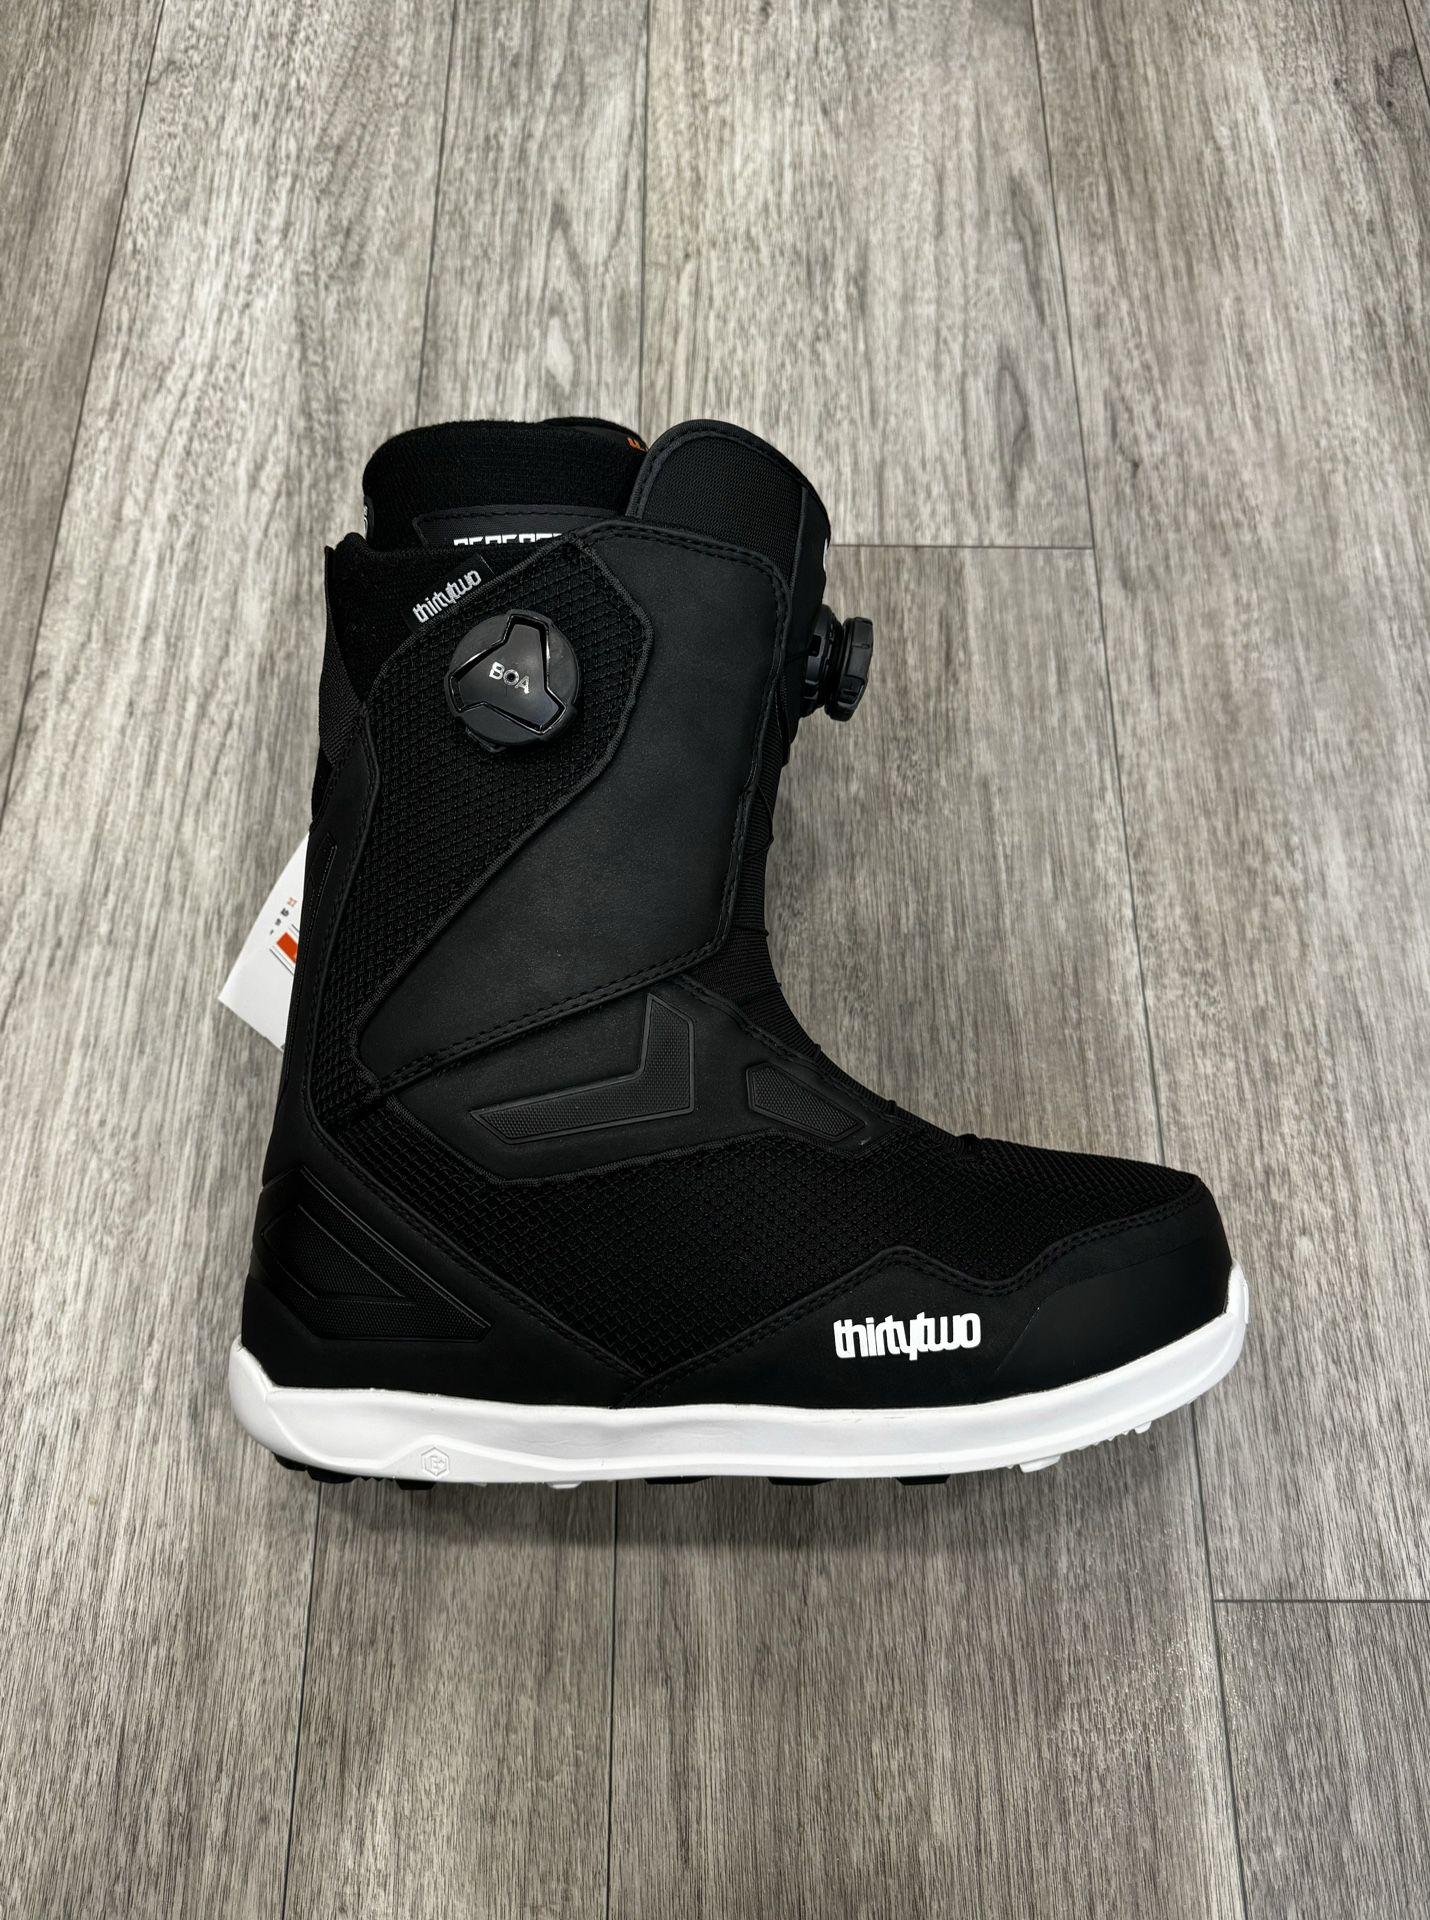 New ThirtyTwo TM-2 Double BOA Snowboard Boots 11.5